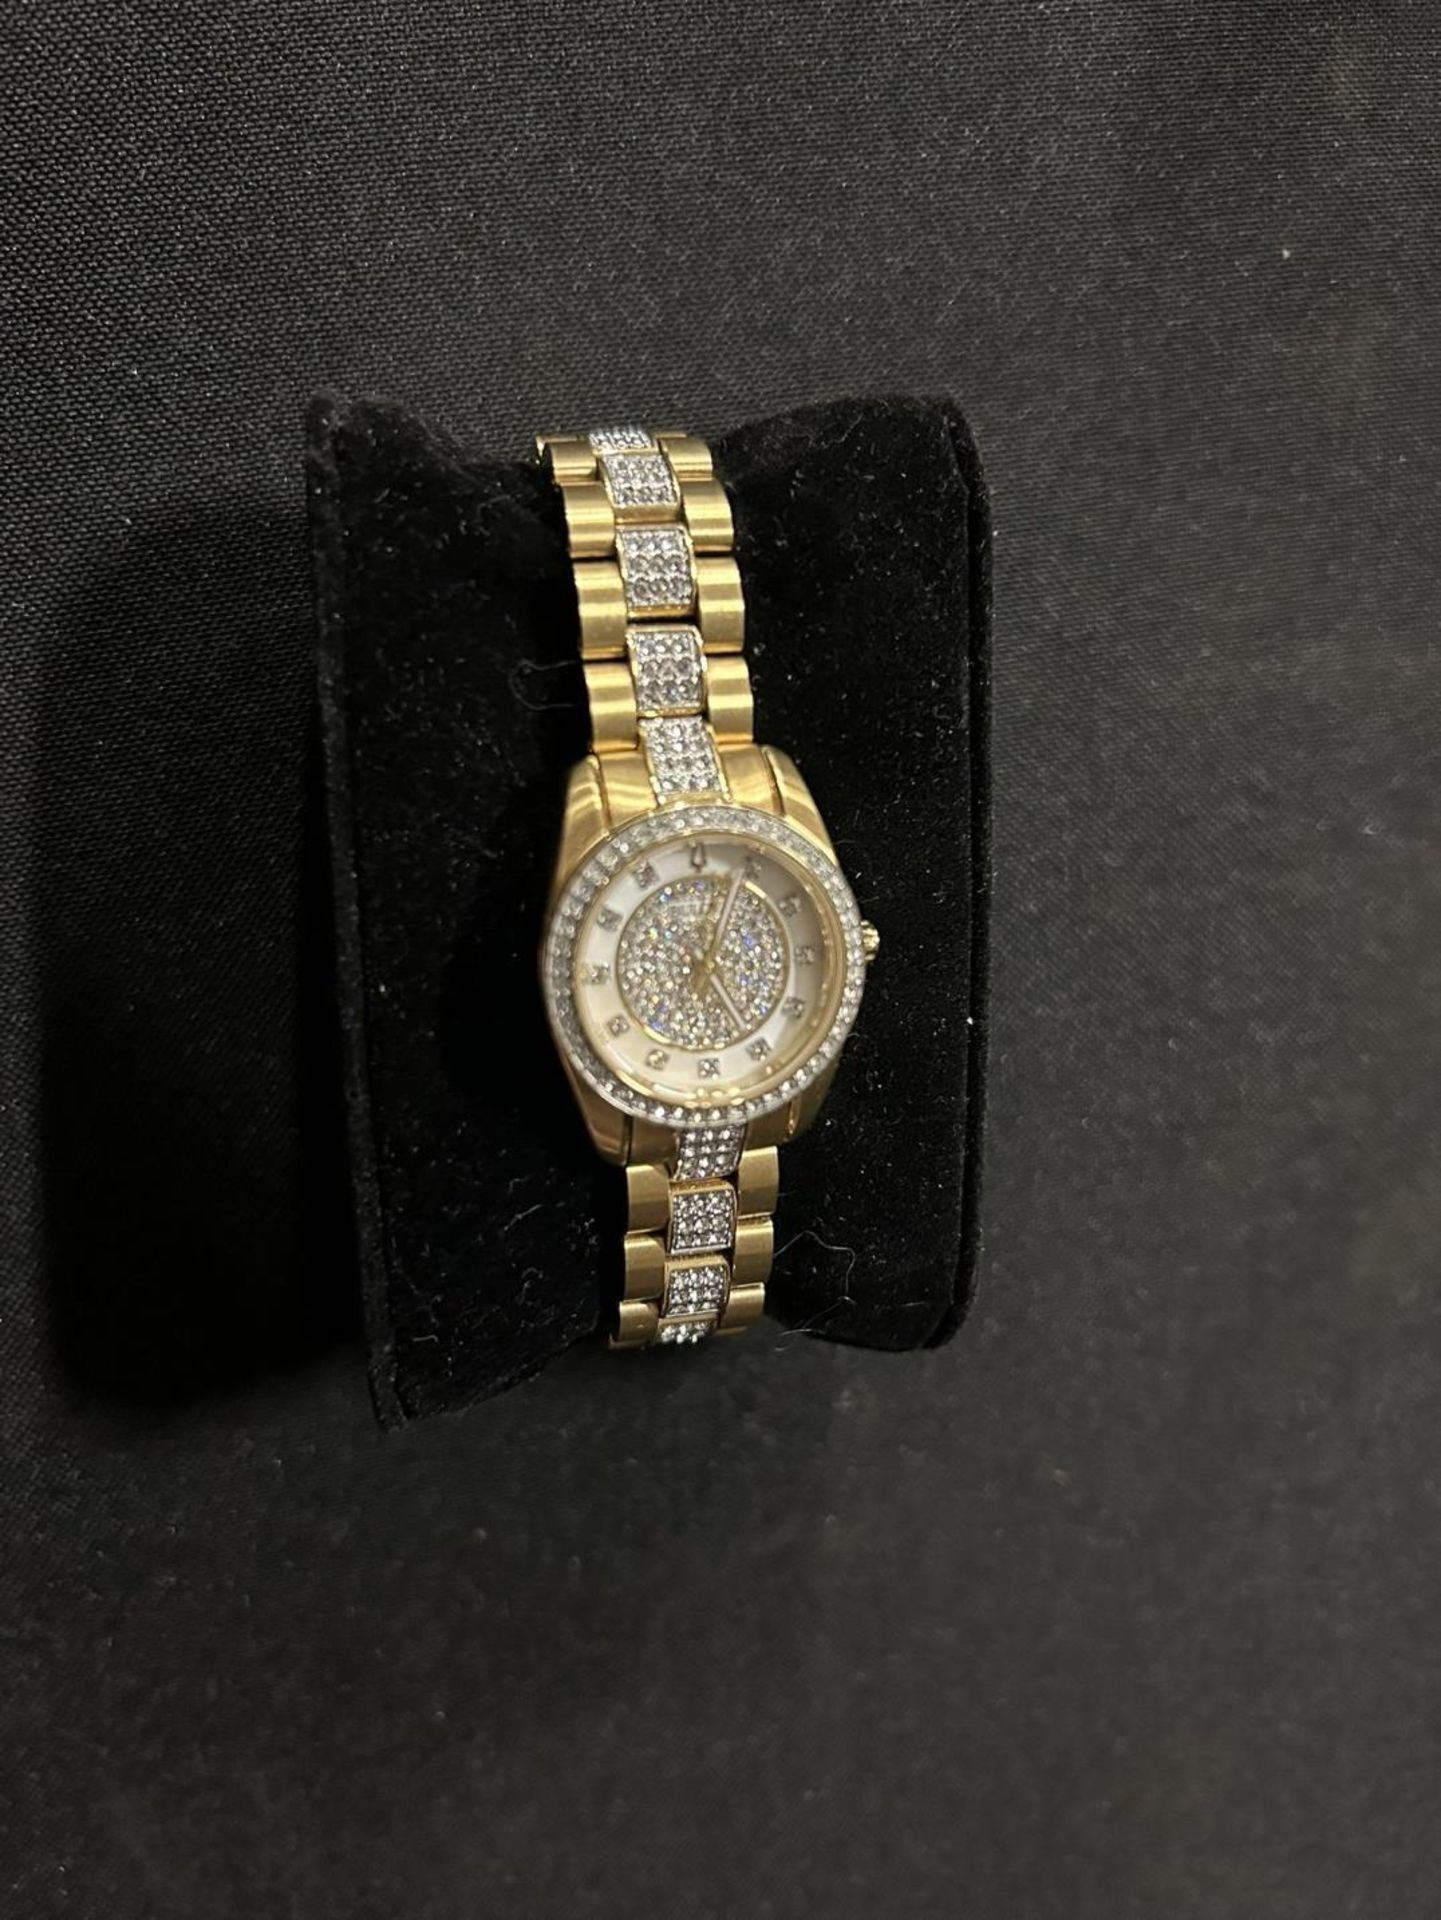 WOMEN'S BULOVA MOTHER OF PEARL DIAL WATCH - Image 4 of 6